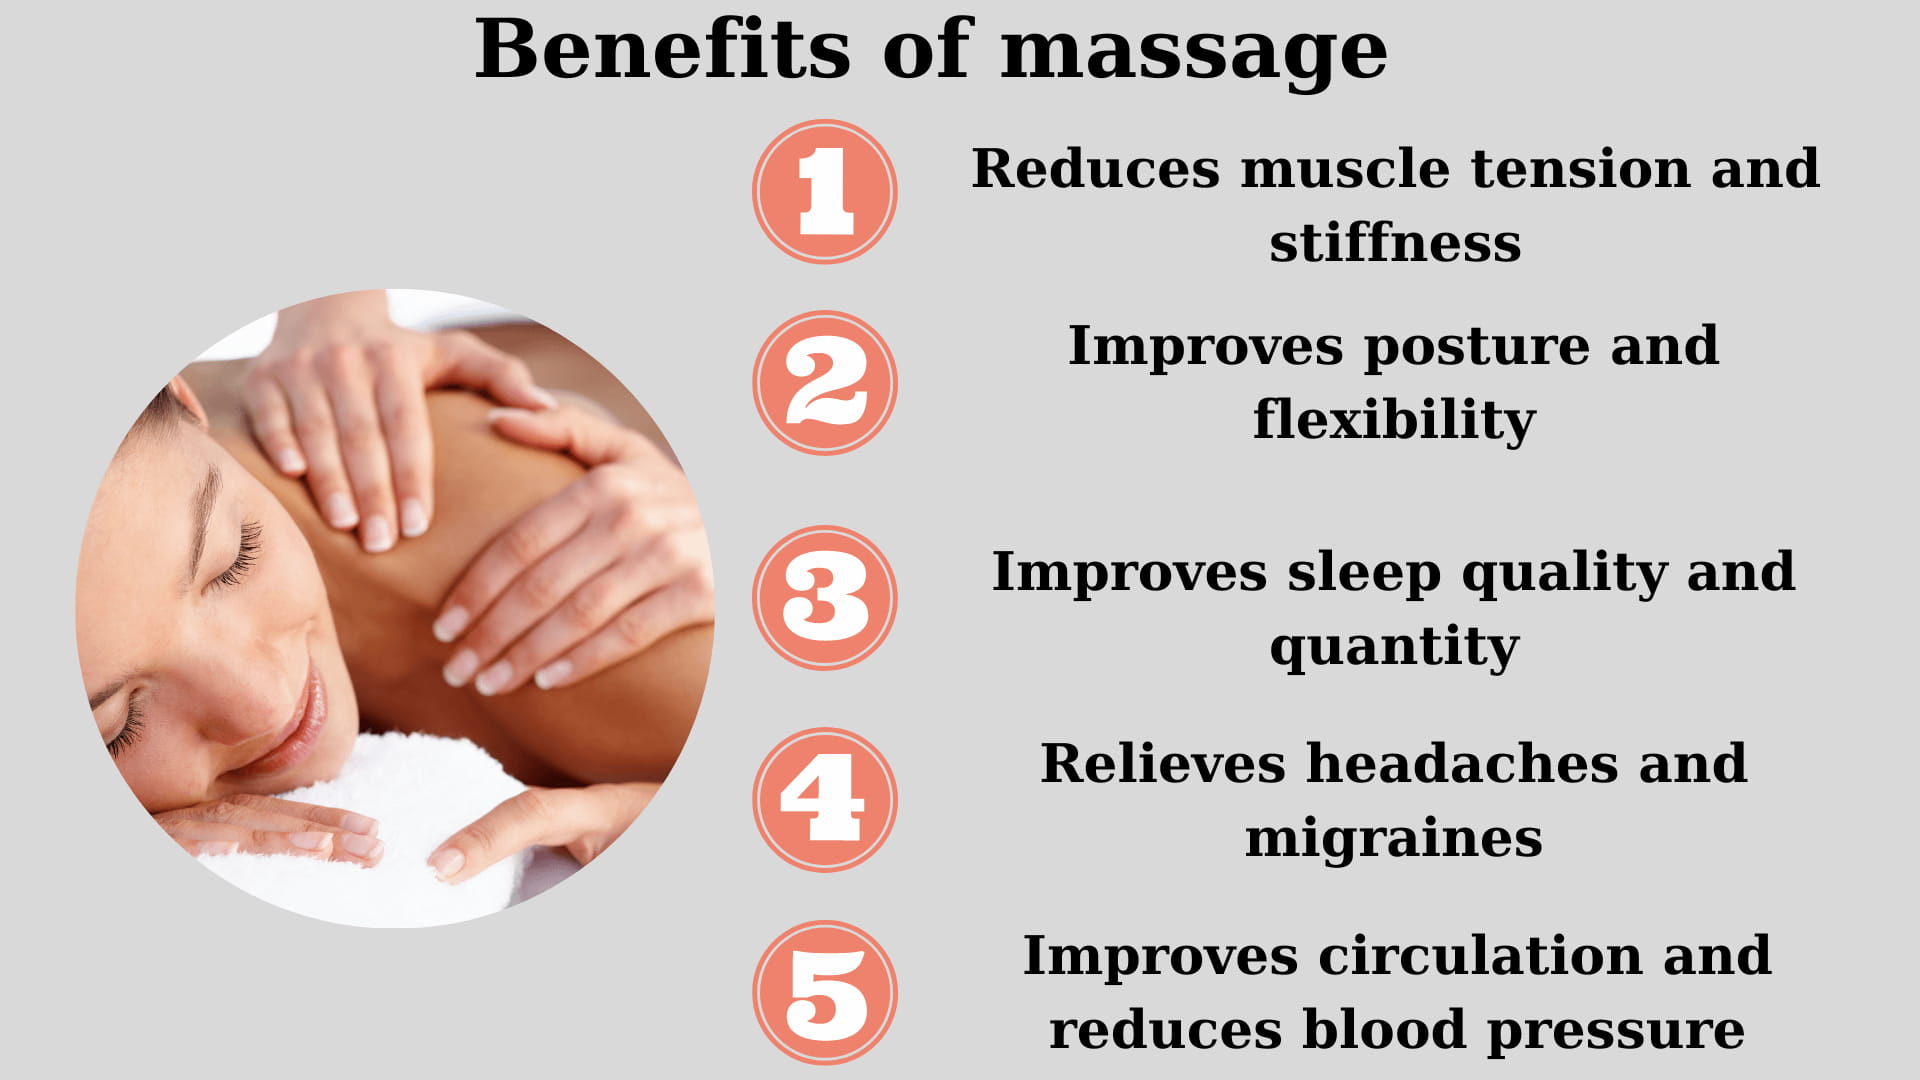 What are the benefits of medical massage?